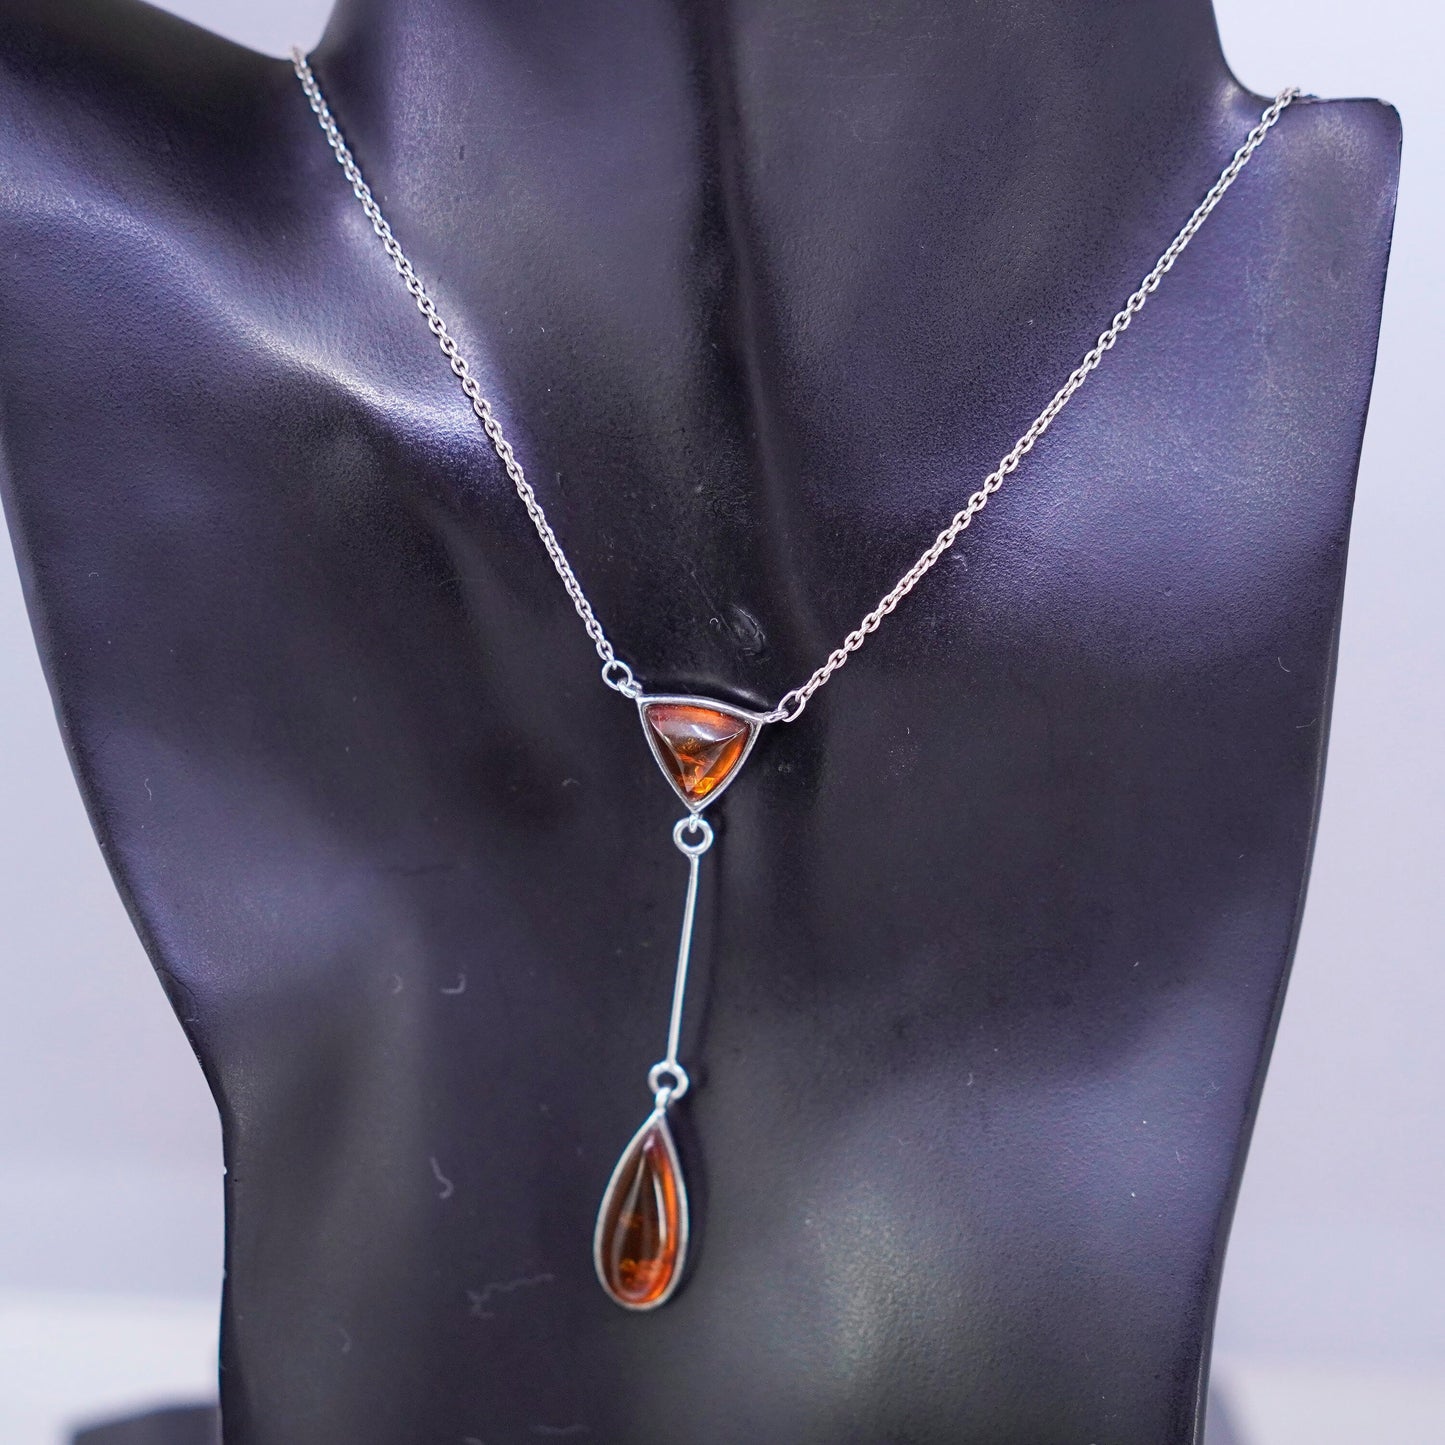 16”, vintage Sterling silver necklace, 925 circle chain with amber pendant